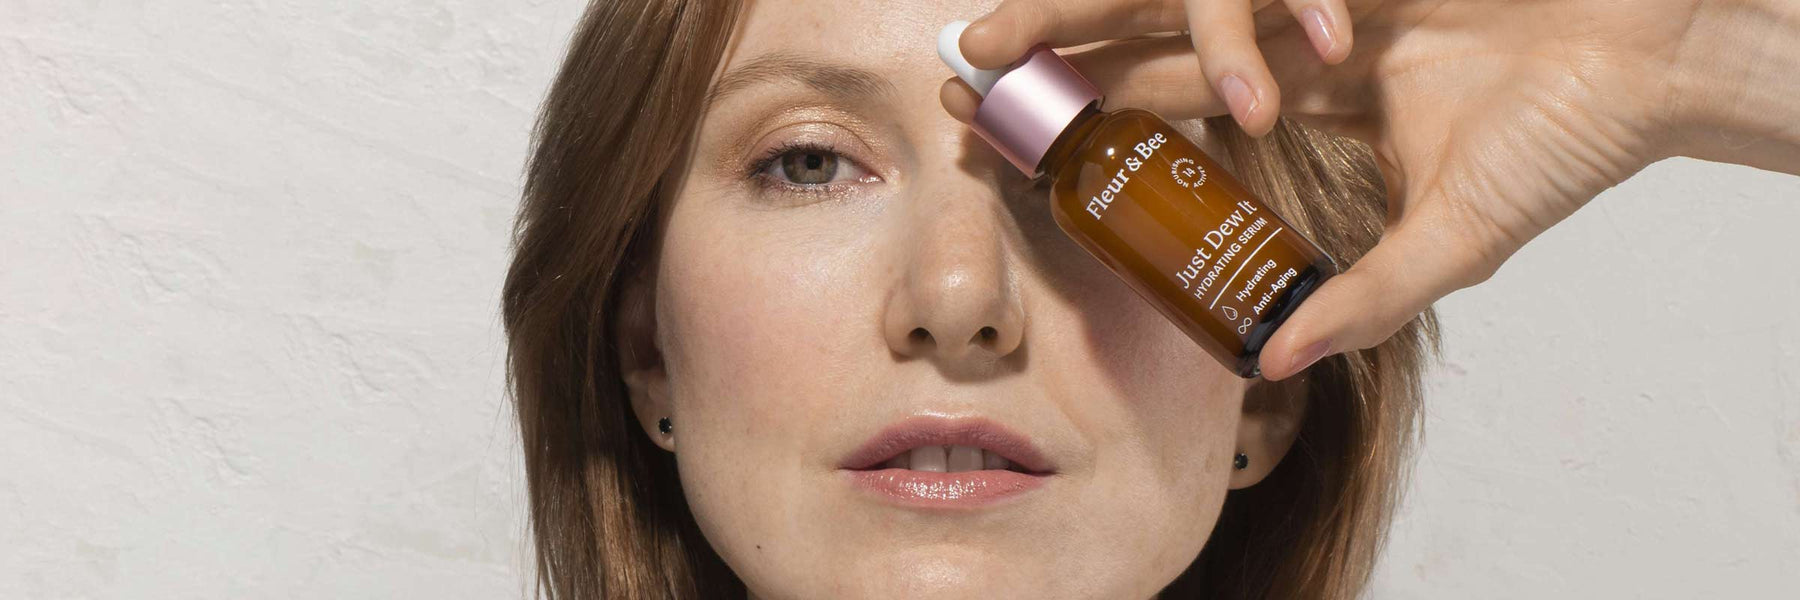 How to Choose the Best Face Serum for Your Skin